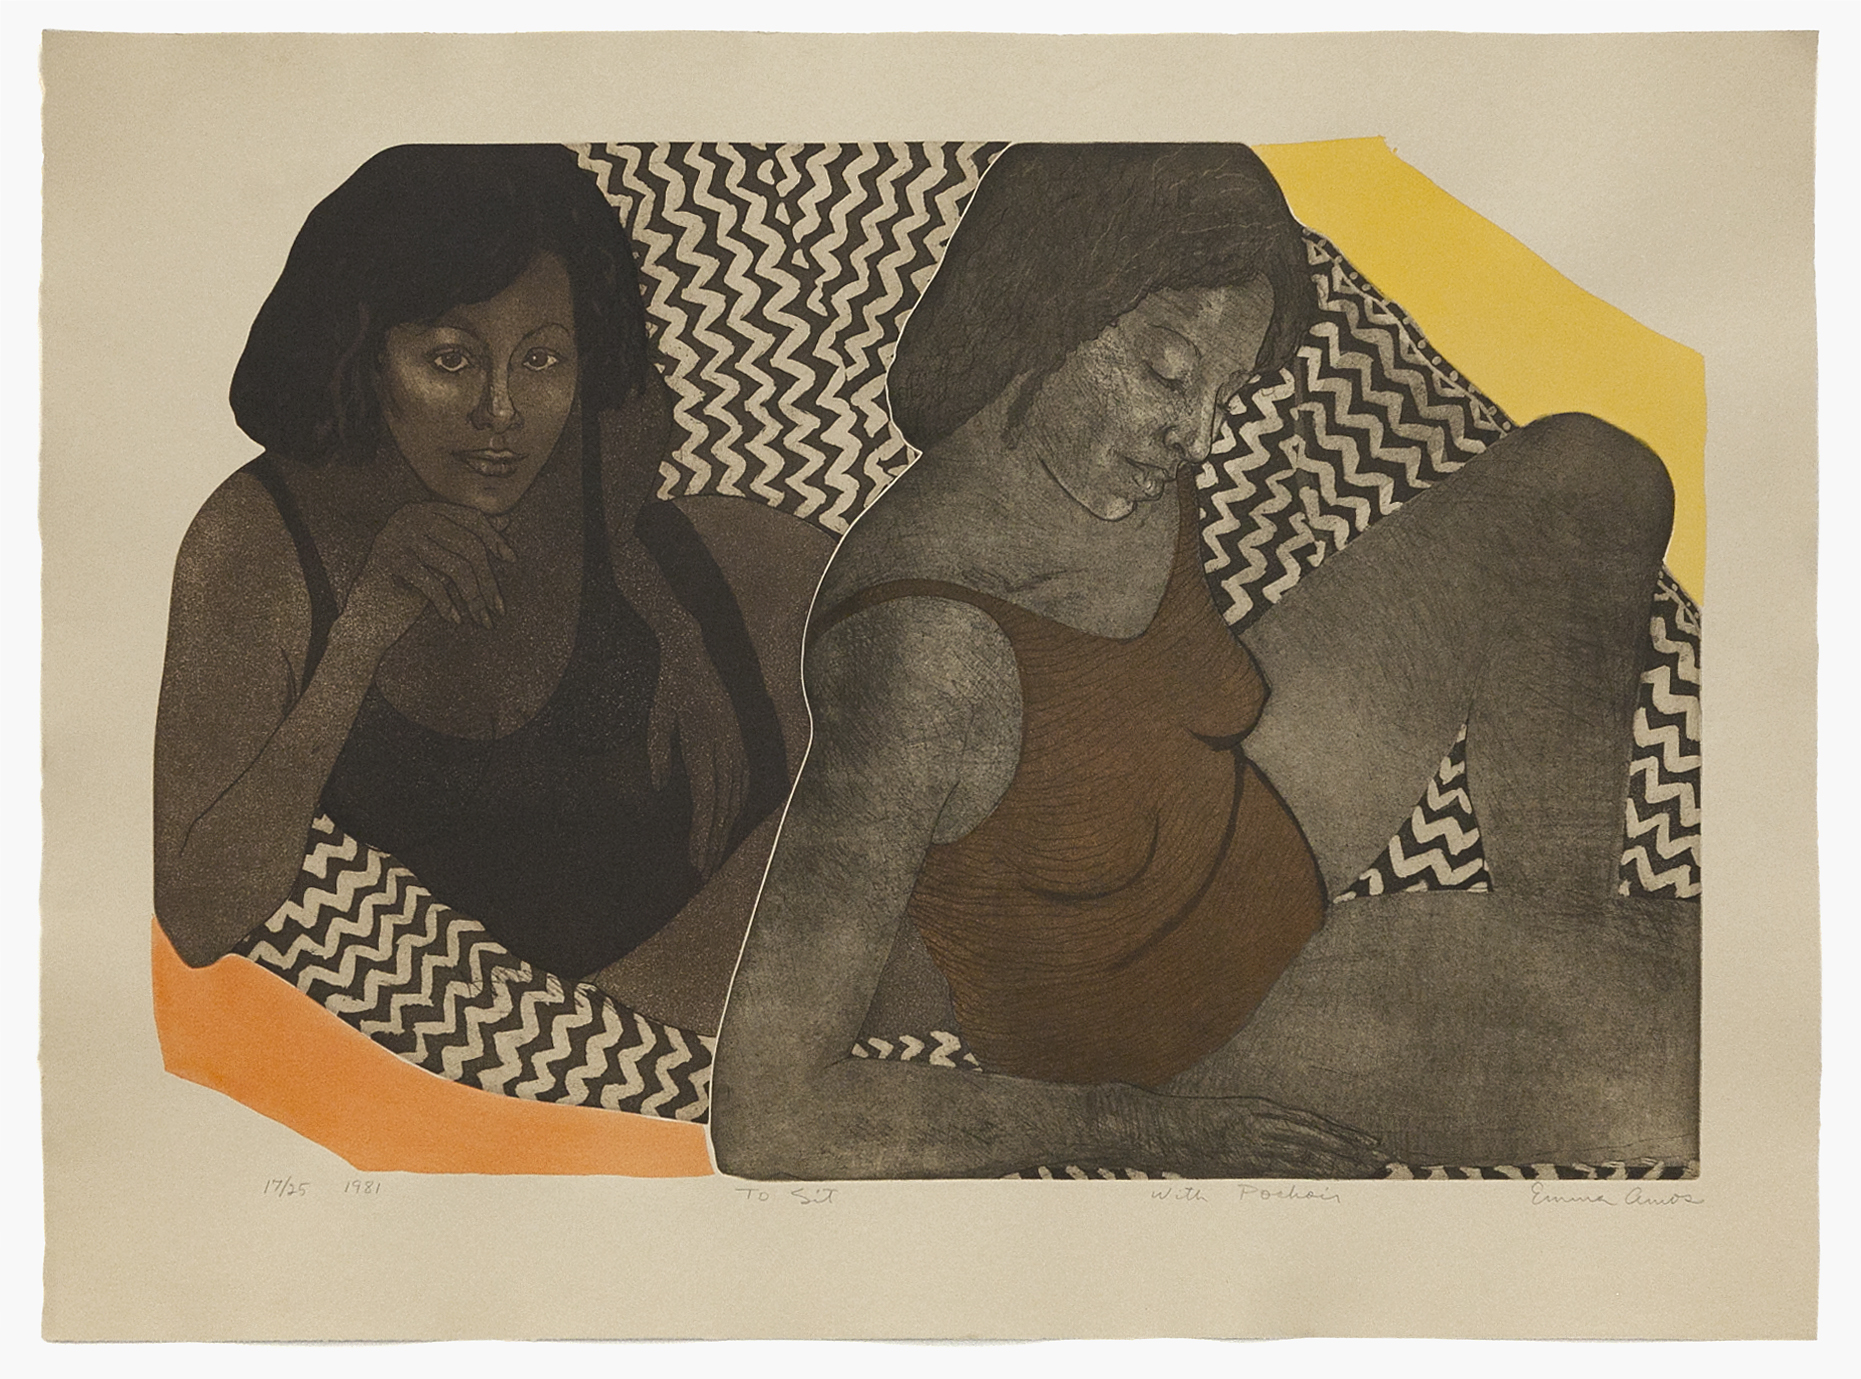 Emma Amos To Sit (with Pochoir), 1981 Etching, aquatint and styrene stencil Image Dimensions: 25 x 36 inches (63.5 x 91.4 cm) Paper Dimensions: 29 1/2 x 40 inches (74.9 x 101.6 cm) Edition of 25